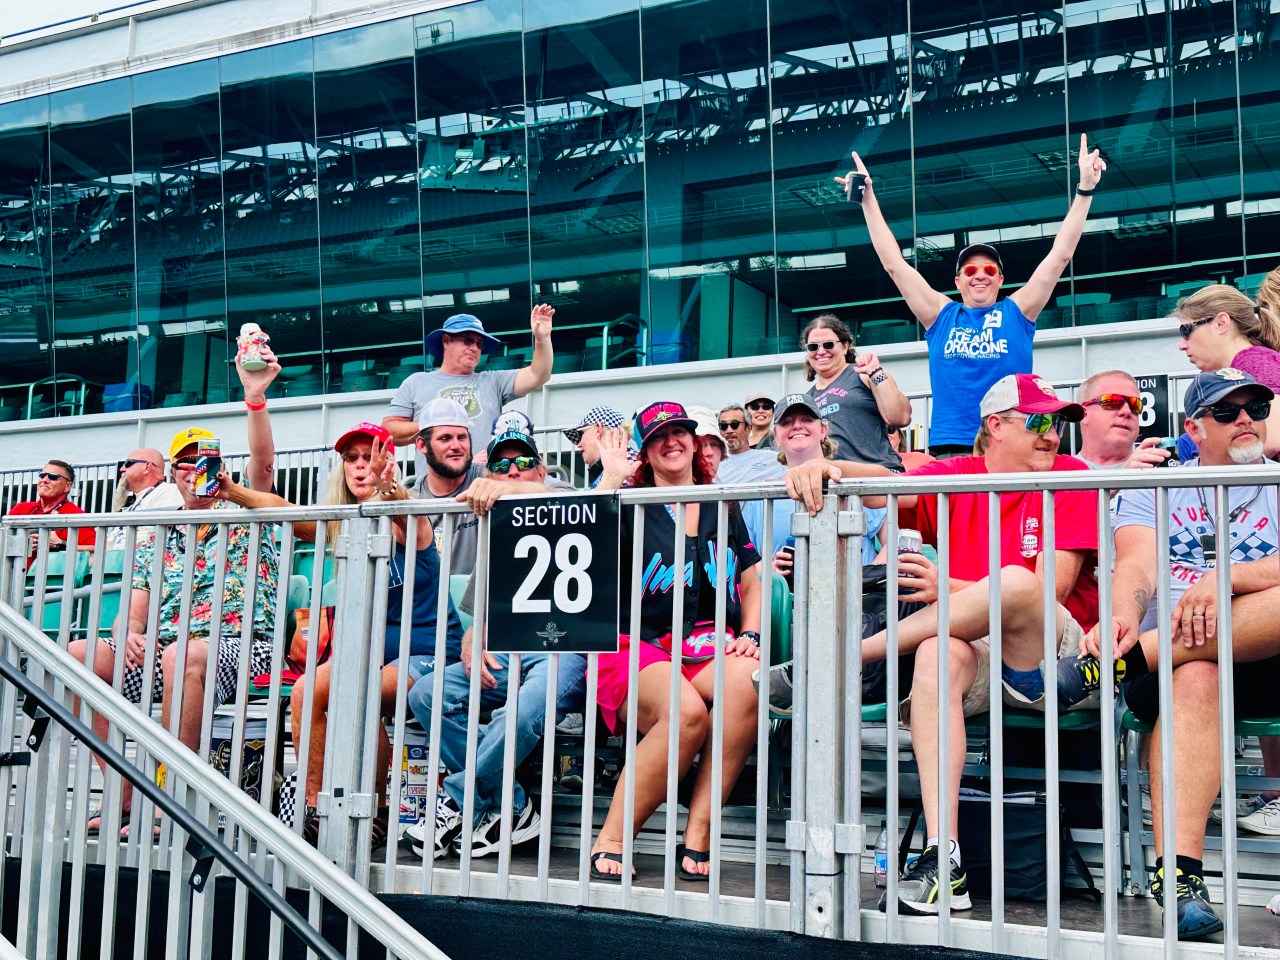 Fast Friday revs up fan excitement as the Indy 500 approaches [Video]